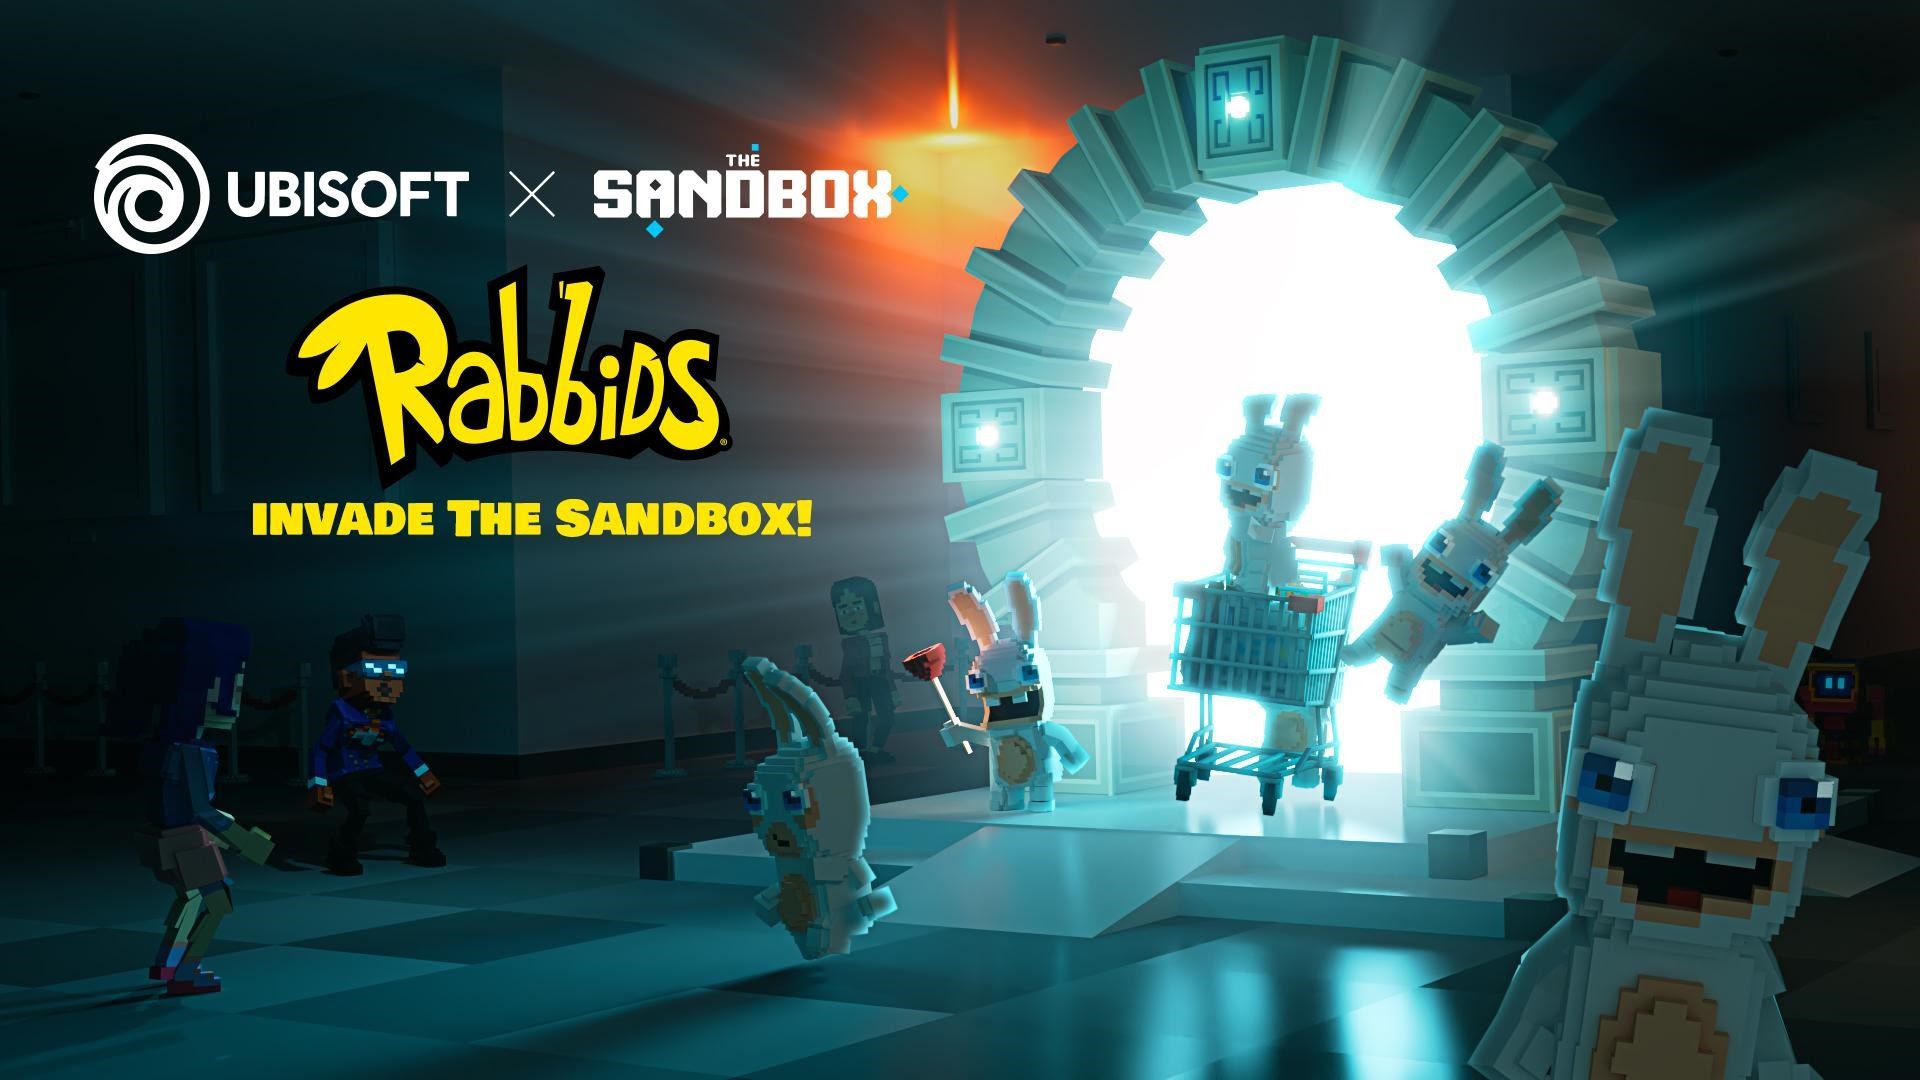 The Sandbox Partners with Ubisoft to Bring Rabbids to Its Metaverse